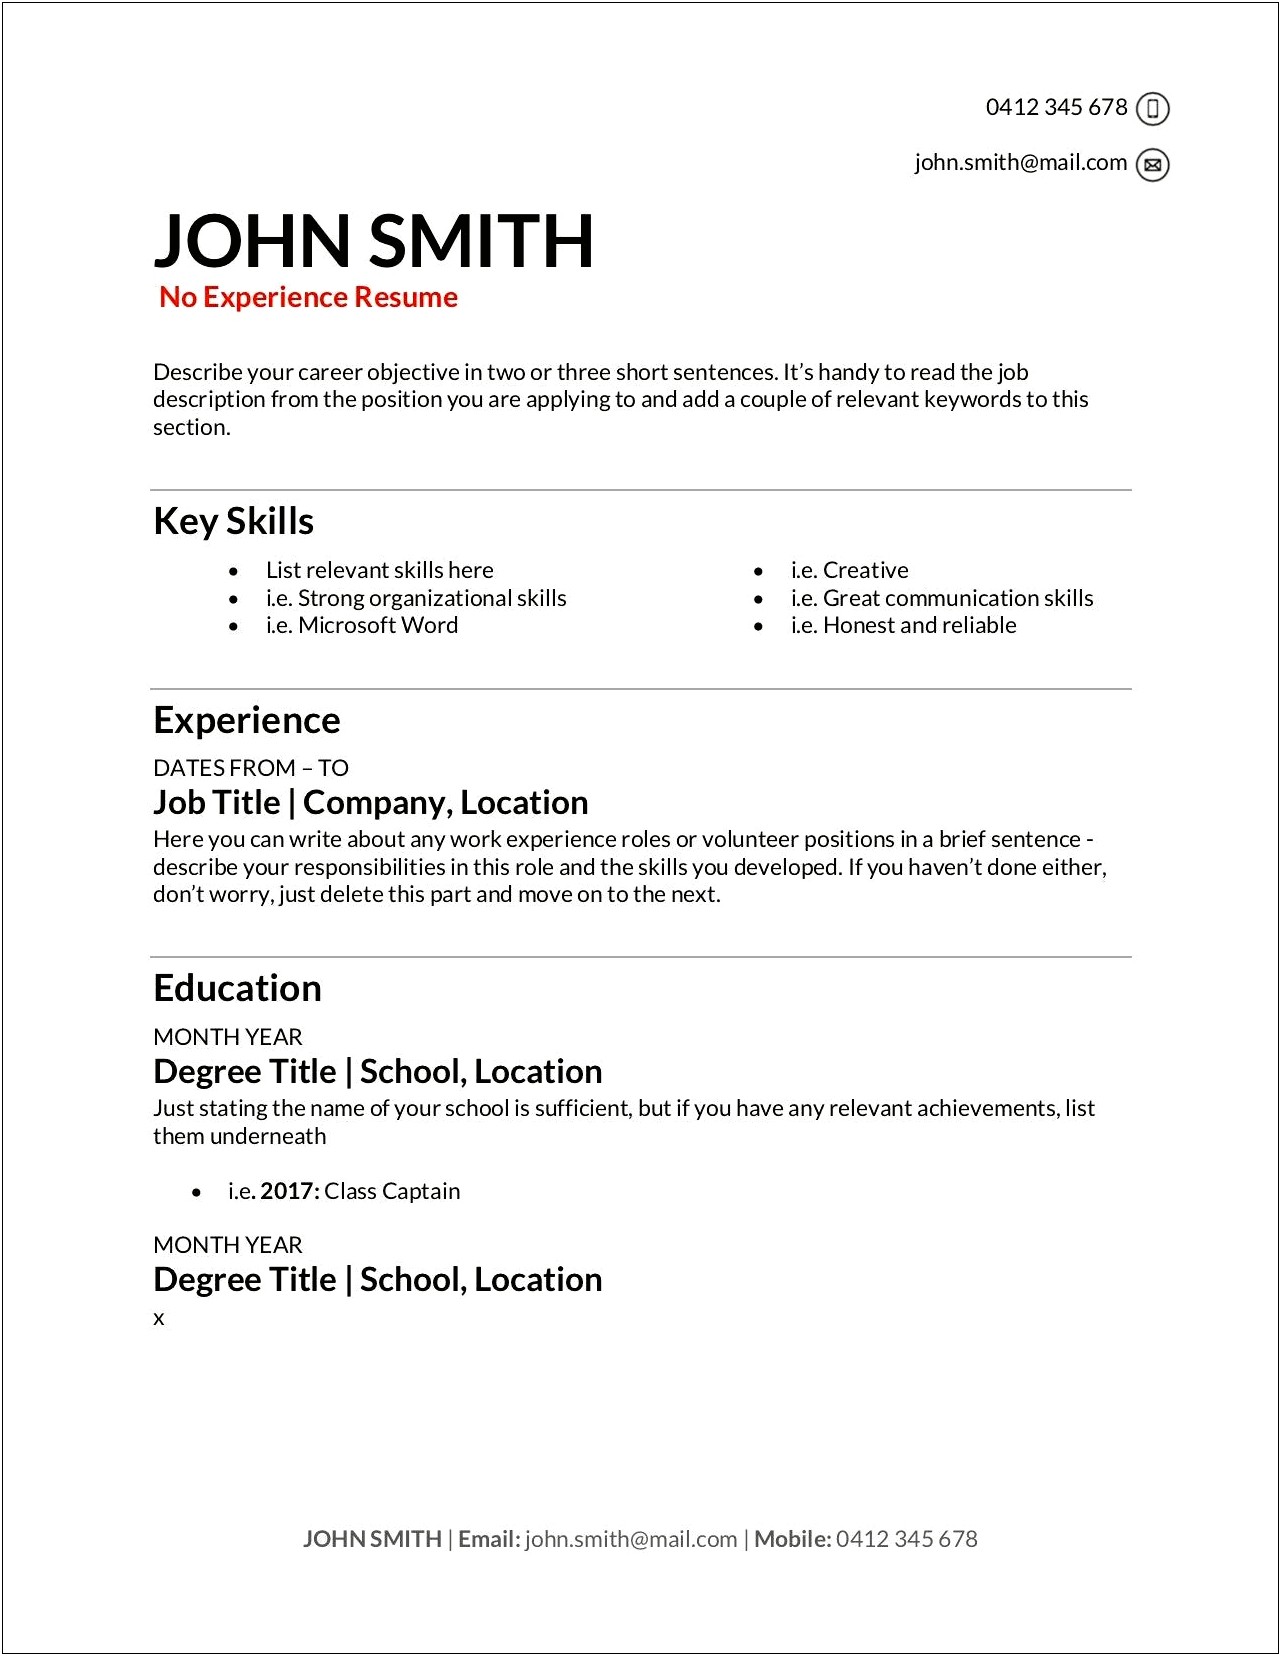 Putting Volunteer Work On Resume Only A Month